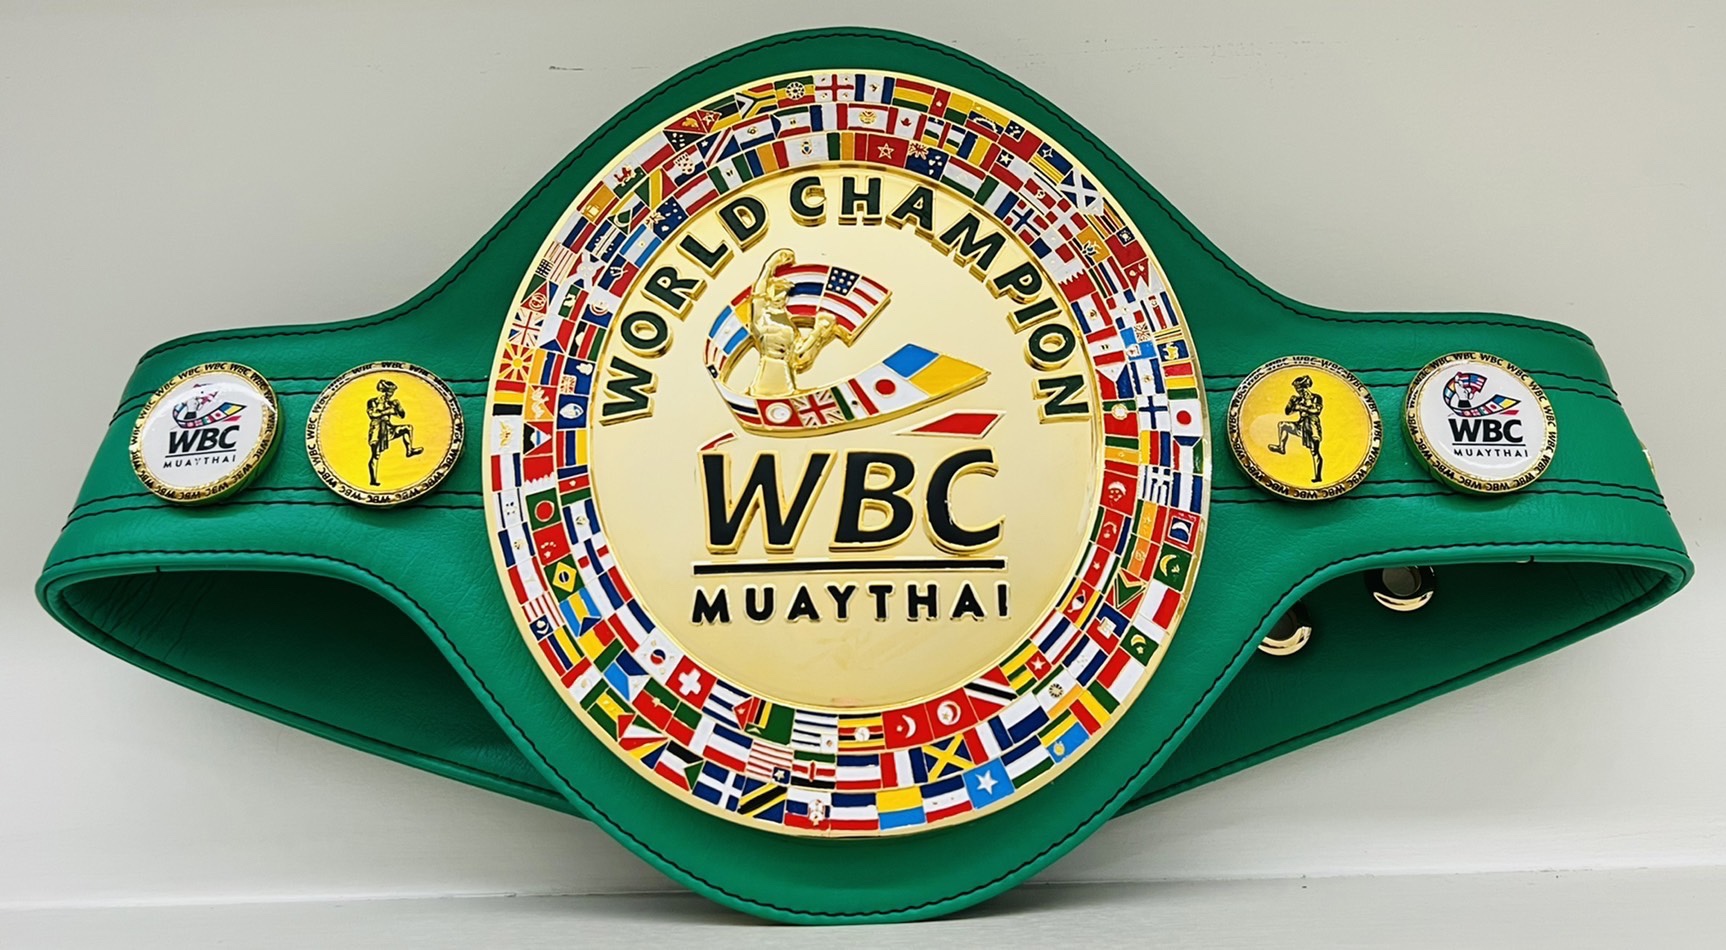 The WBC Belt has a ranking system